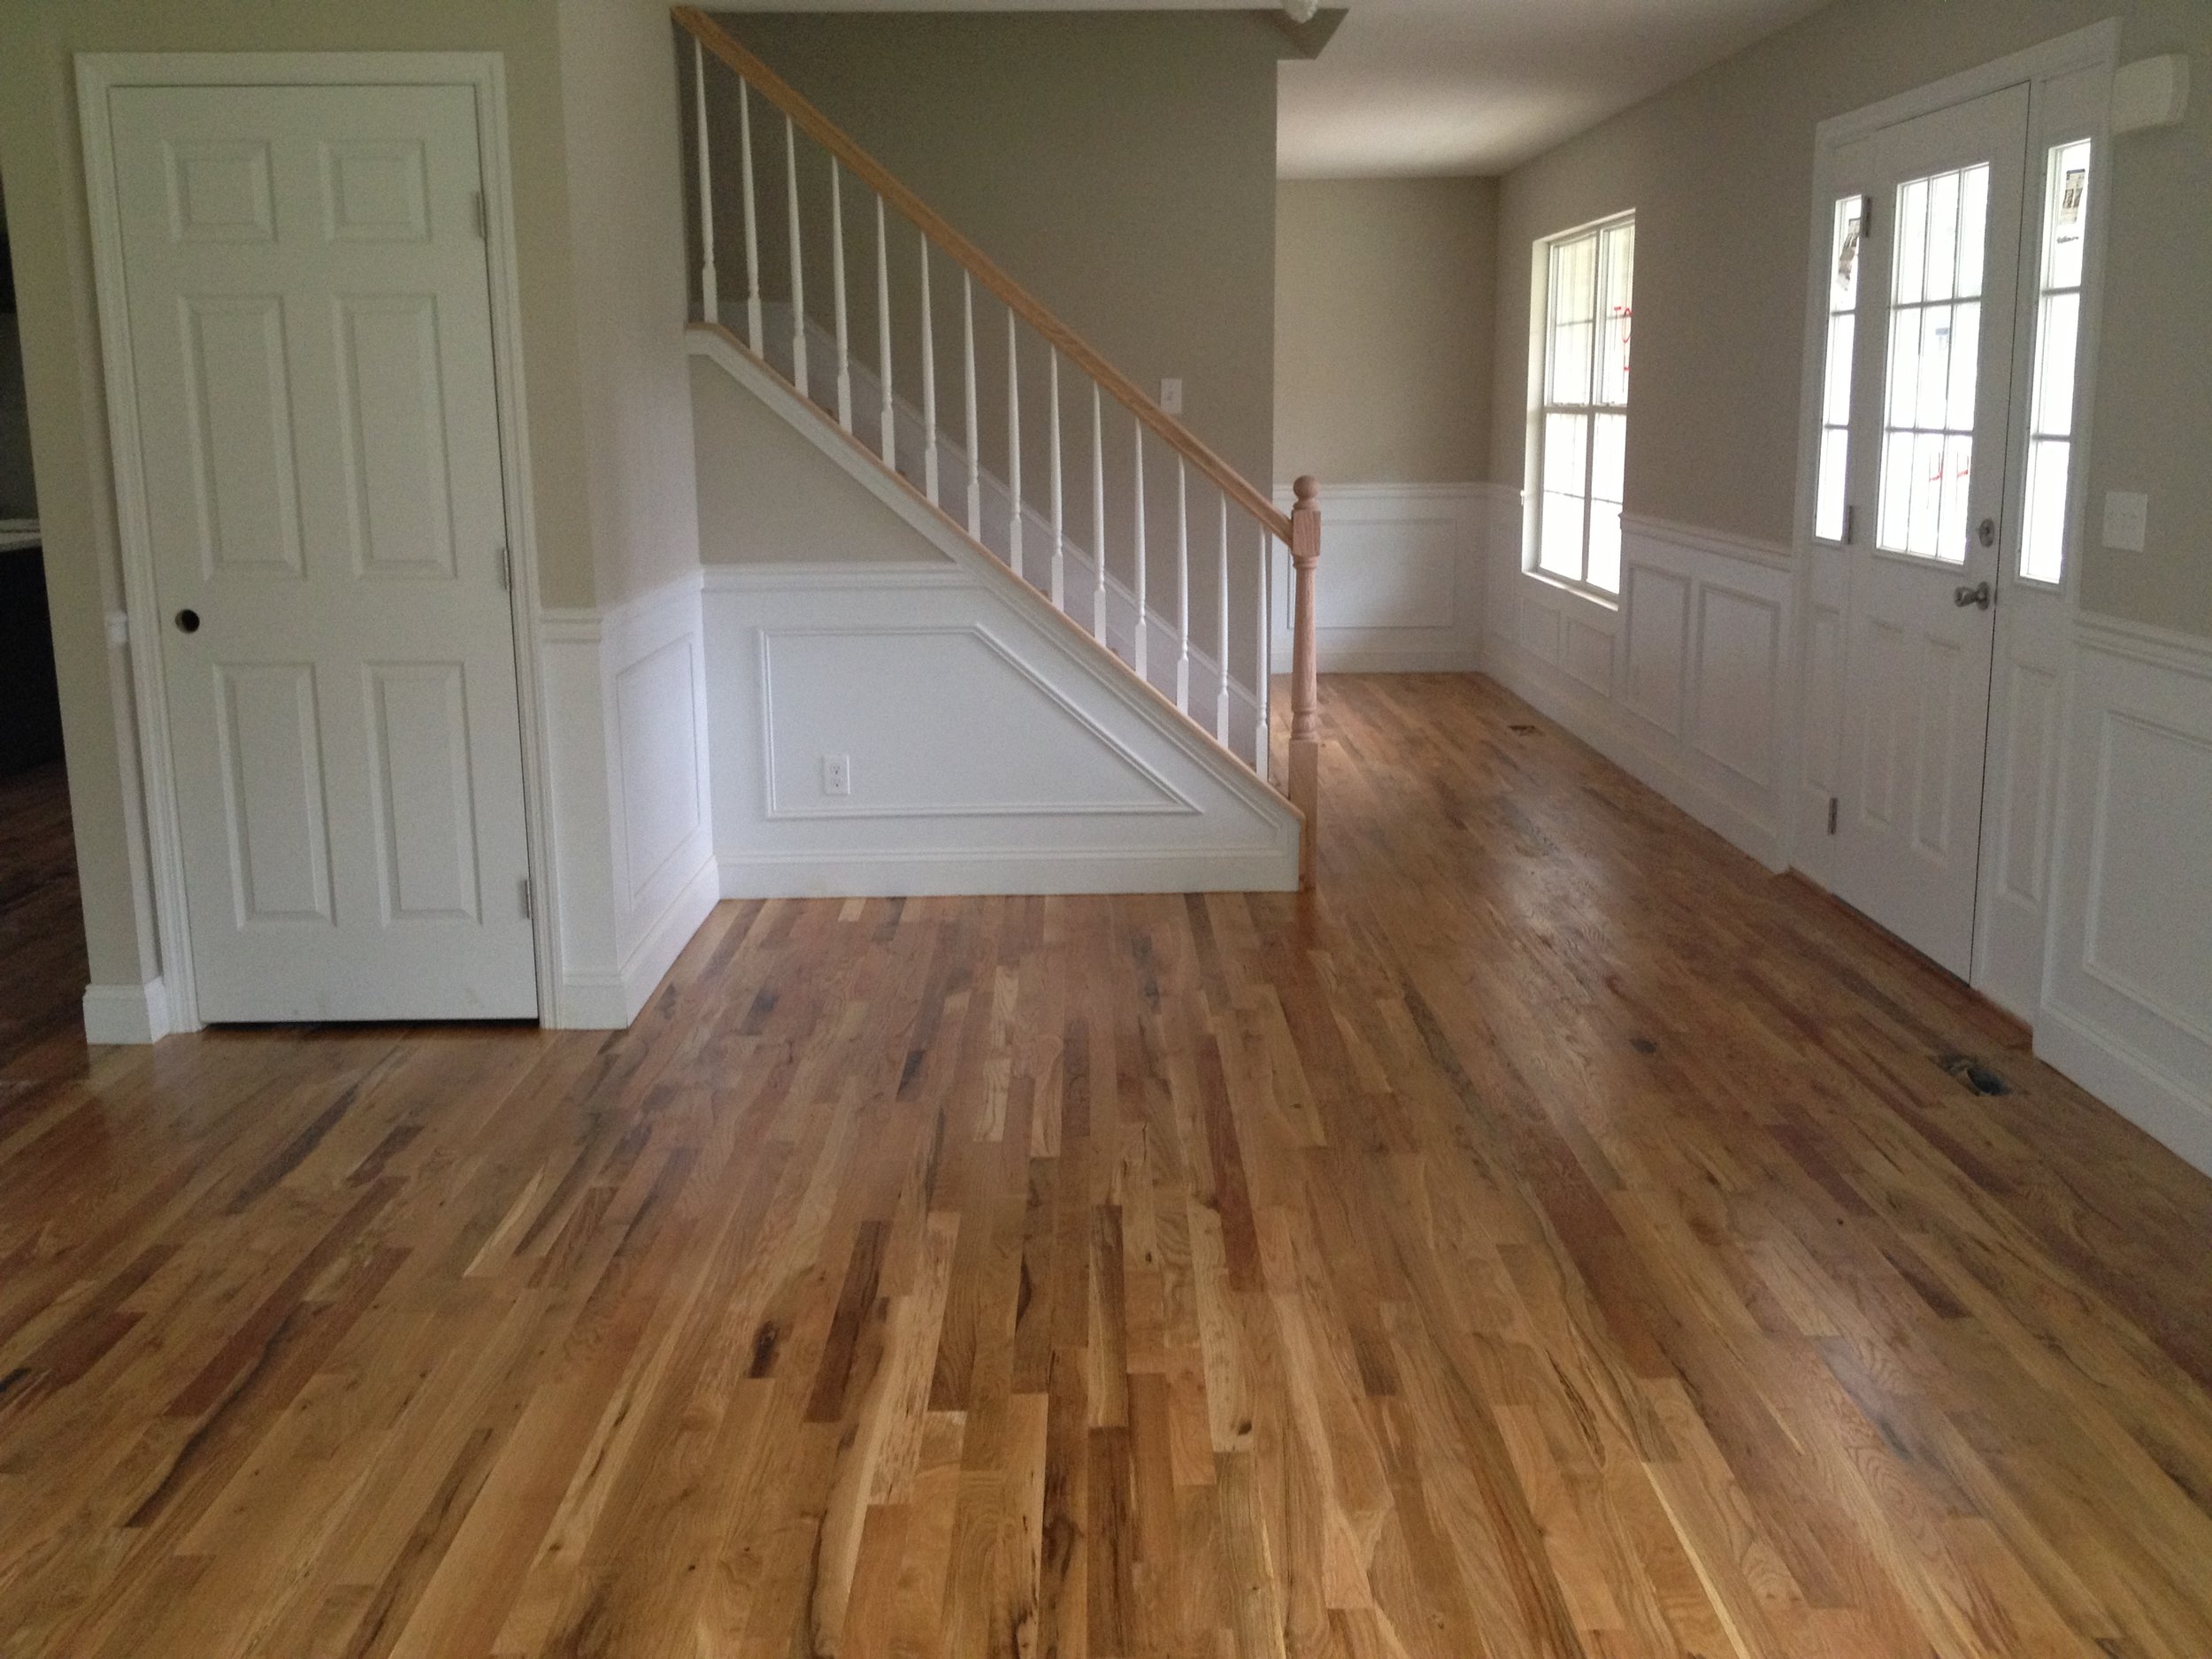 Early American Stain On Red Oak Floors - Red Oak After Stained Early American Premier Hardwood Flooring / It takes an expert to know wood species and how the floor.